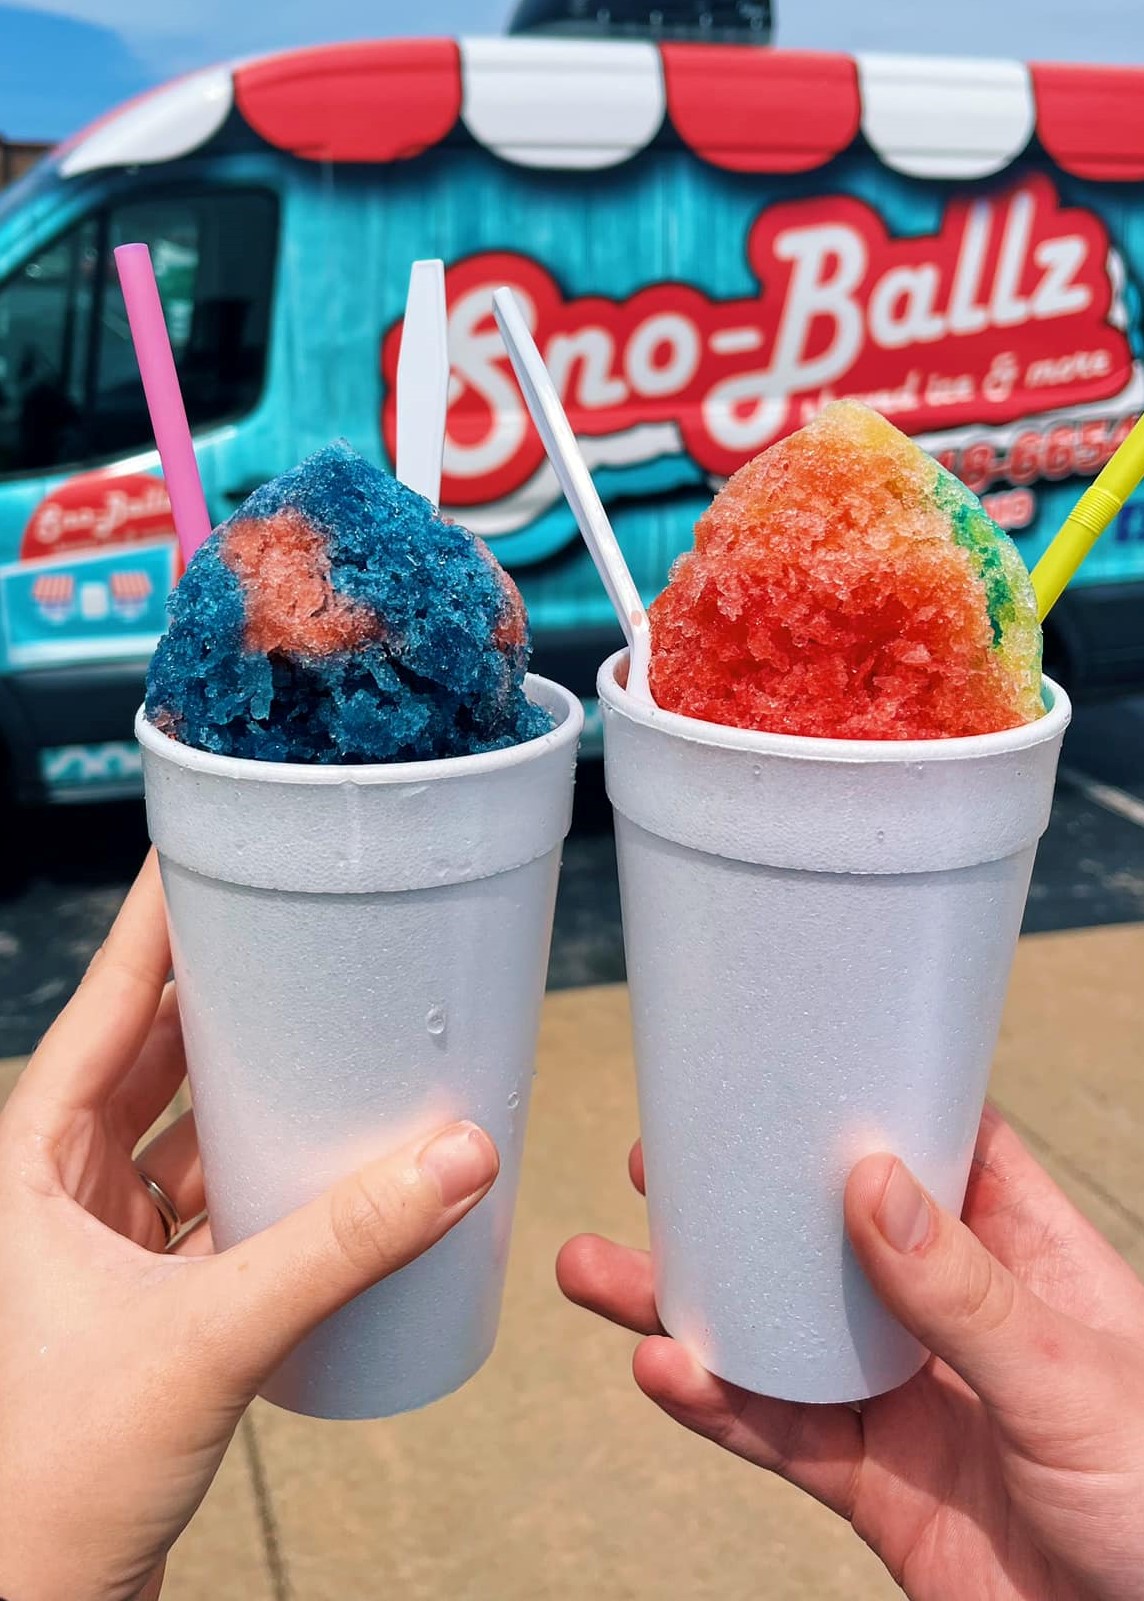 Two hands holing up white styrofoam cups of Hawiian shaved ice in front of a brightly colored food truck